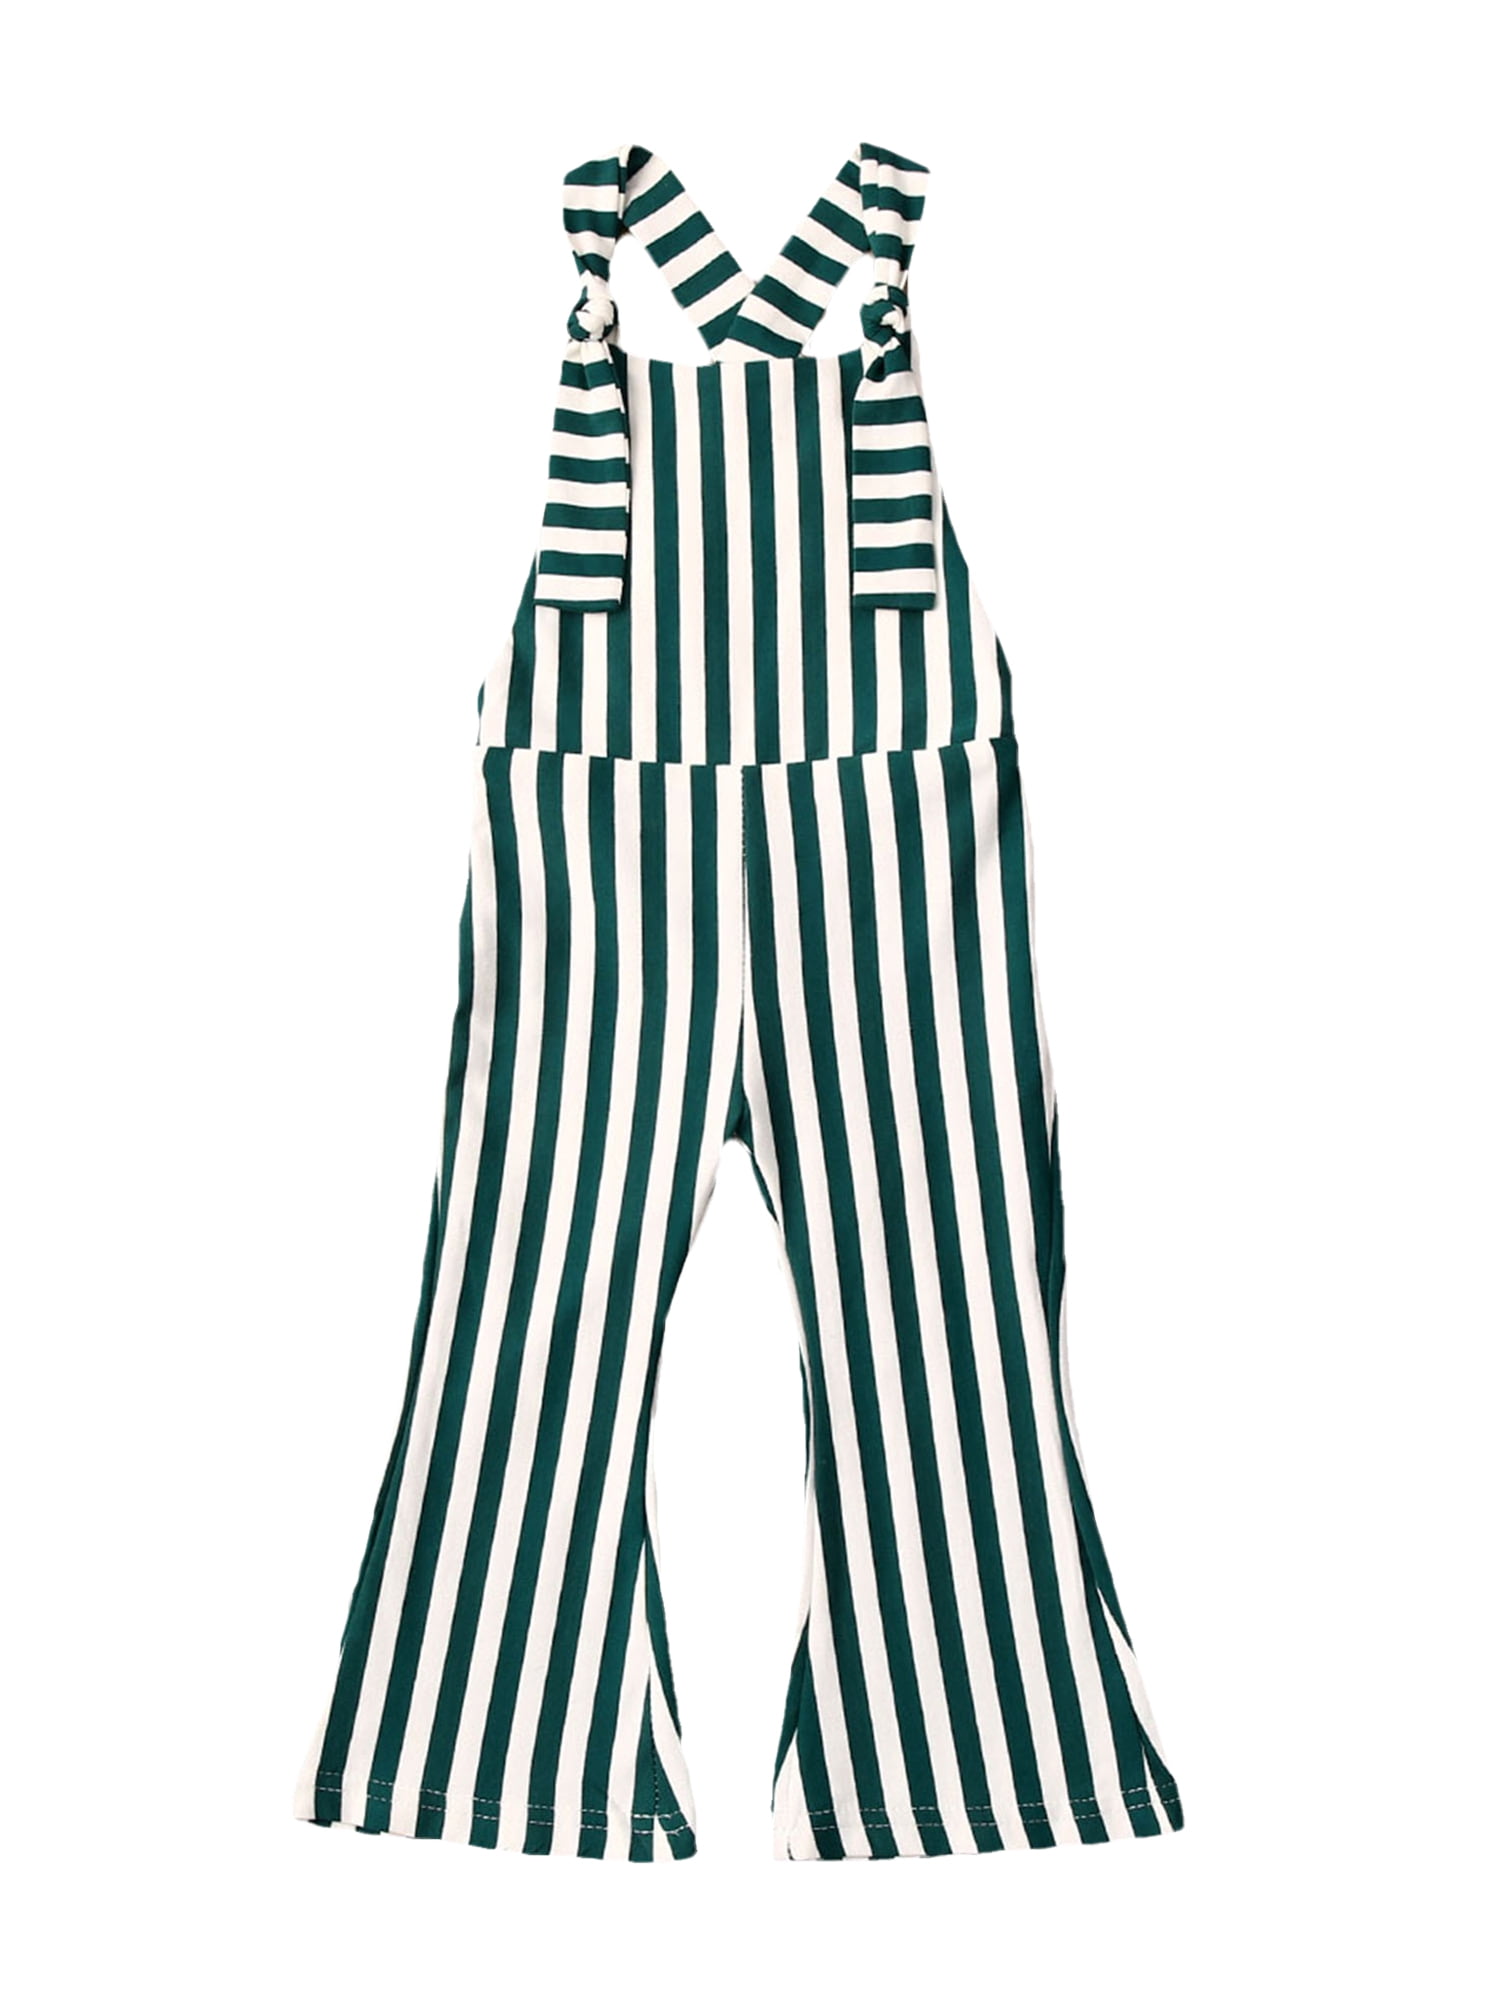 Toddler Kids Baby Girls Sleeveless Striped Overalls Jumpsuit Pants Romper Outfit 